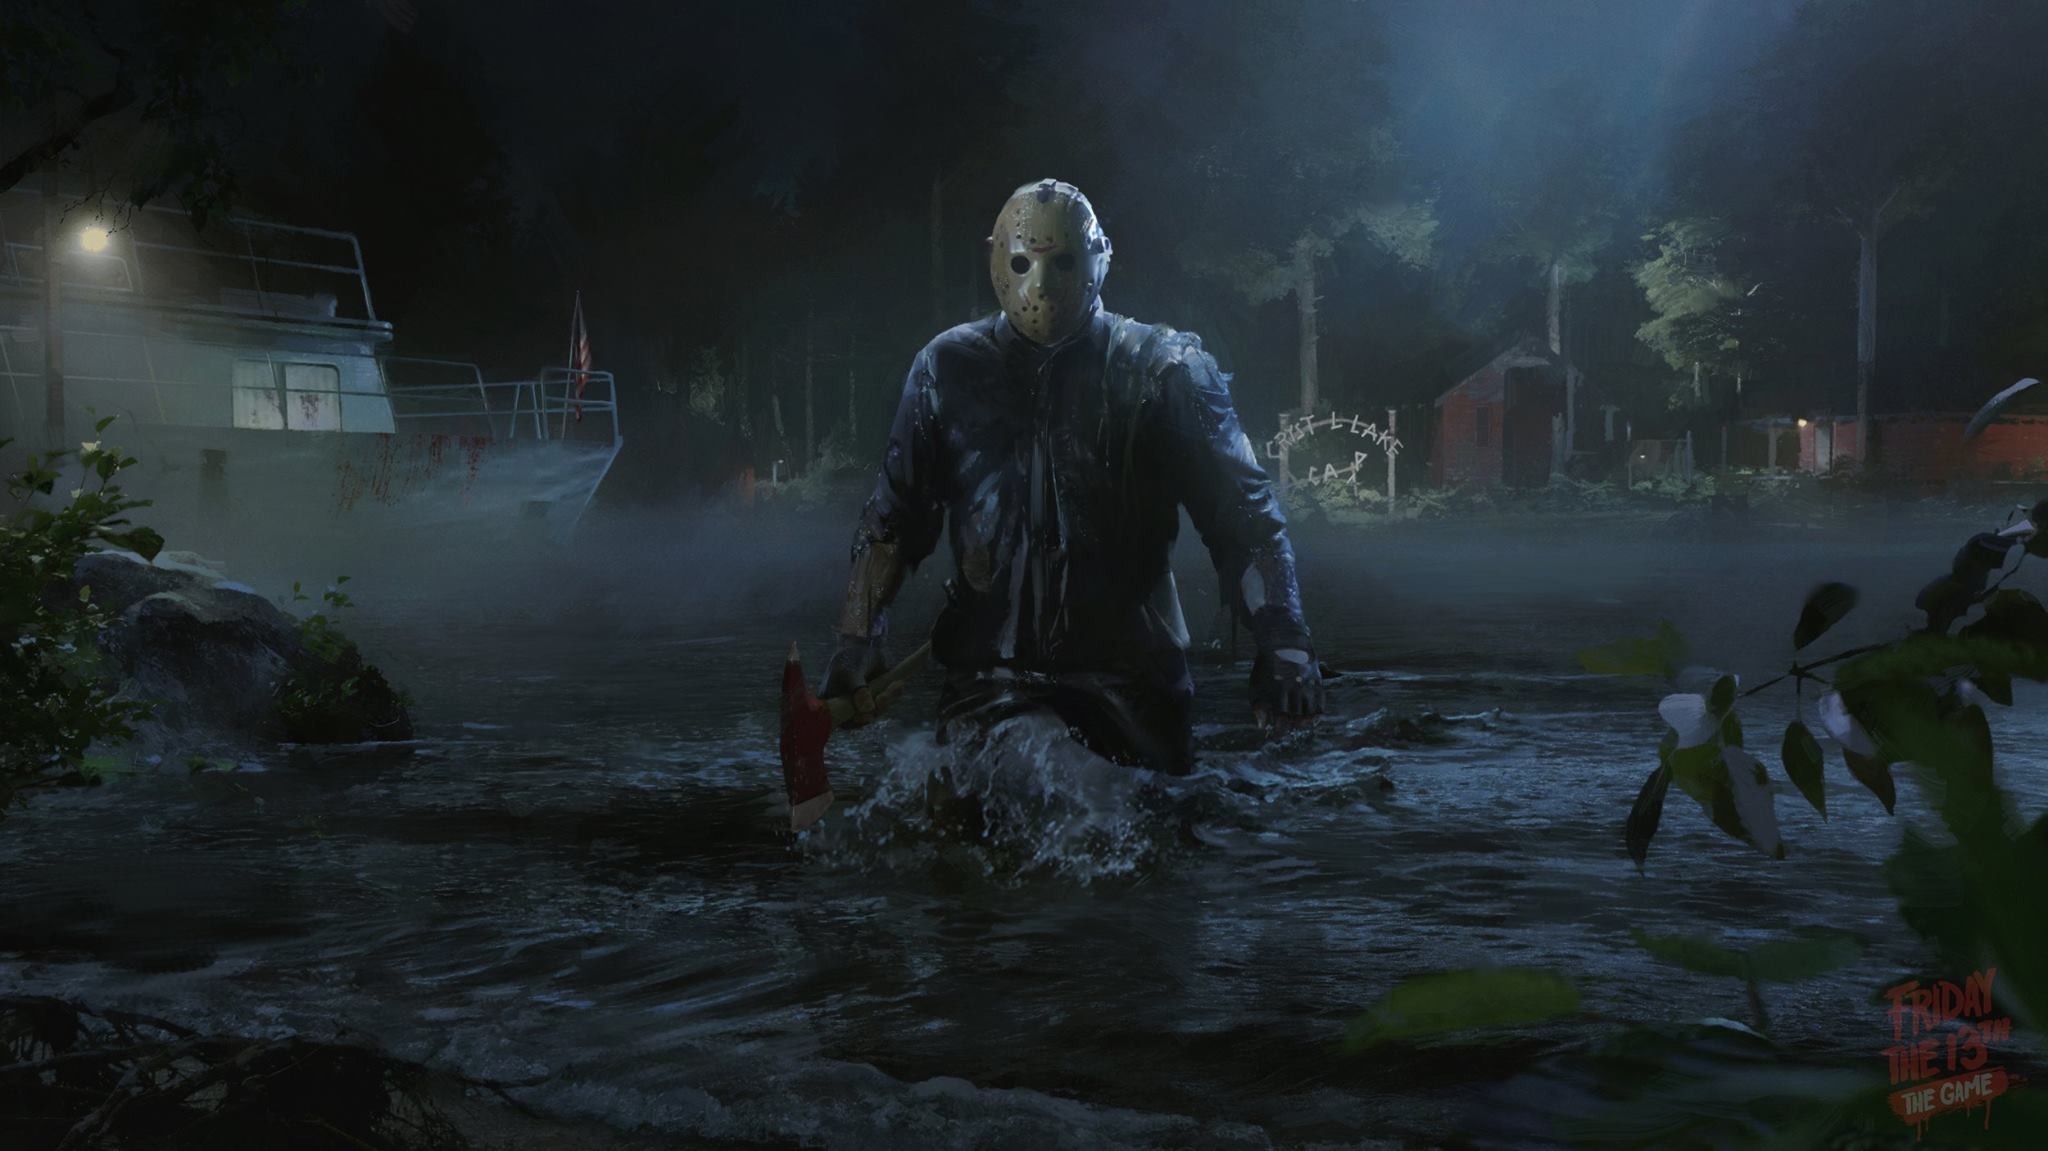 2048x1151 Video Game - Friday the 13th: The Game Wallpaper